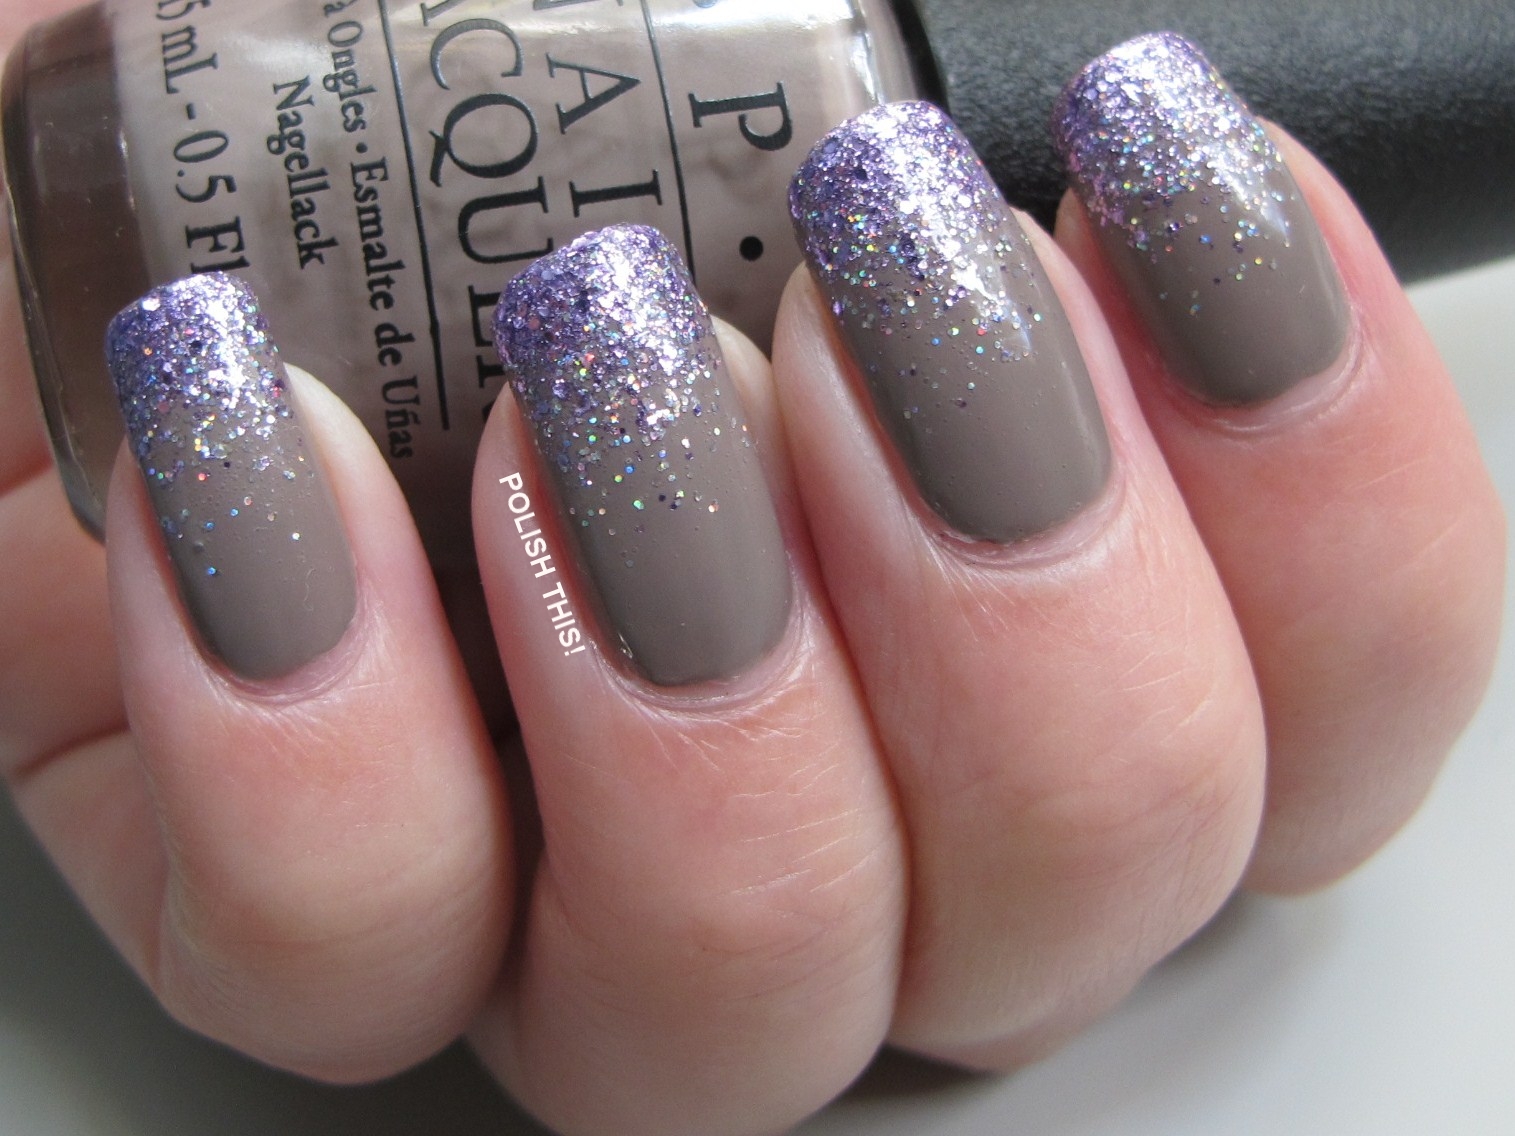 6. OPI Nail Lacquer in "Berlin There Done That" - wide 7